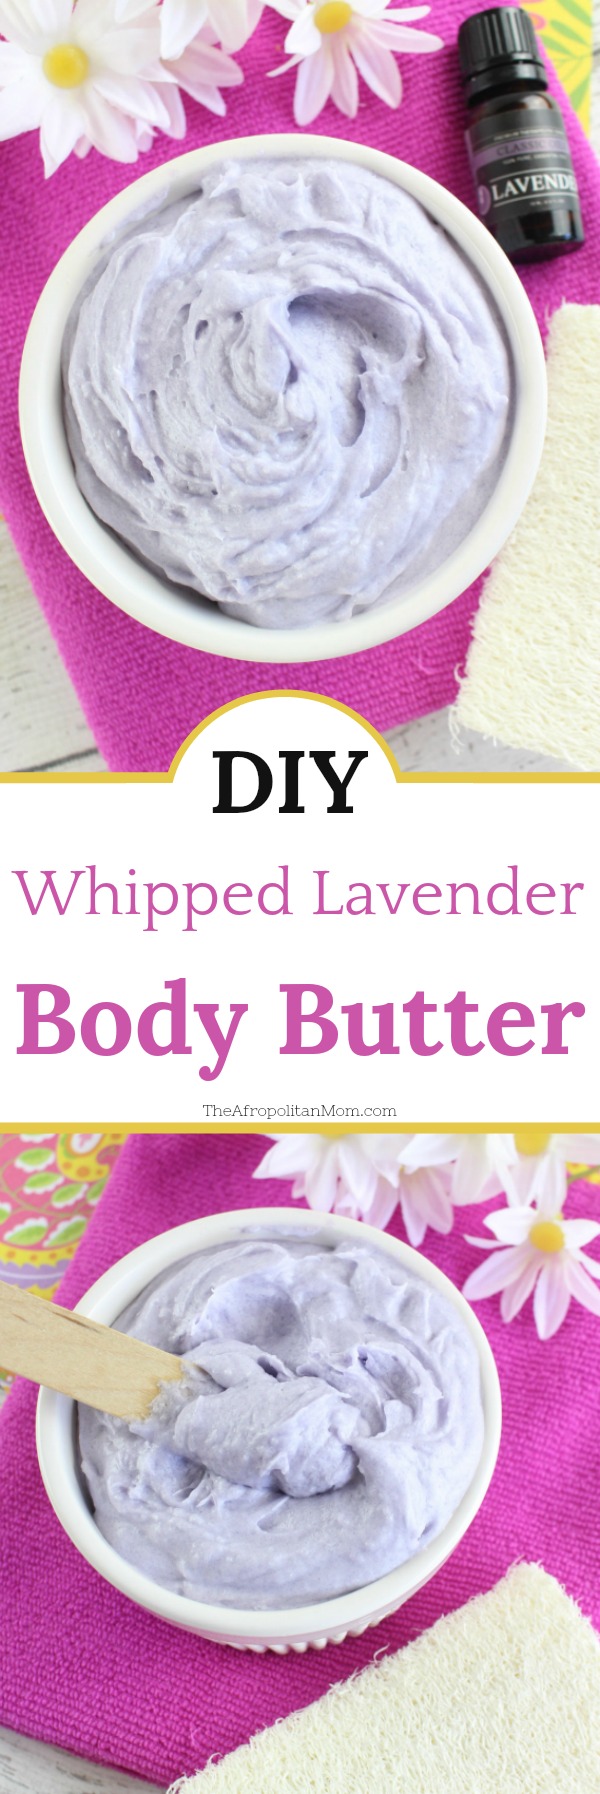 Luxurious DIY Whipped Lavender Body Butter perfect for dry winter skin. It will also make a great gift for your loved ones.